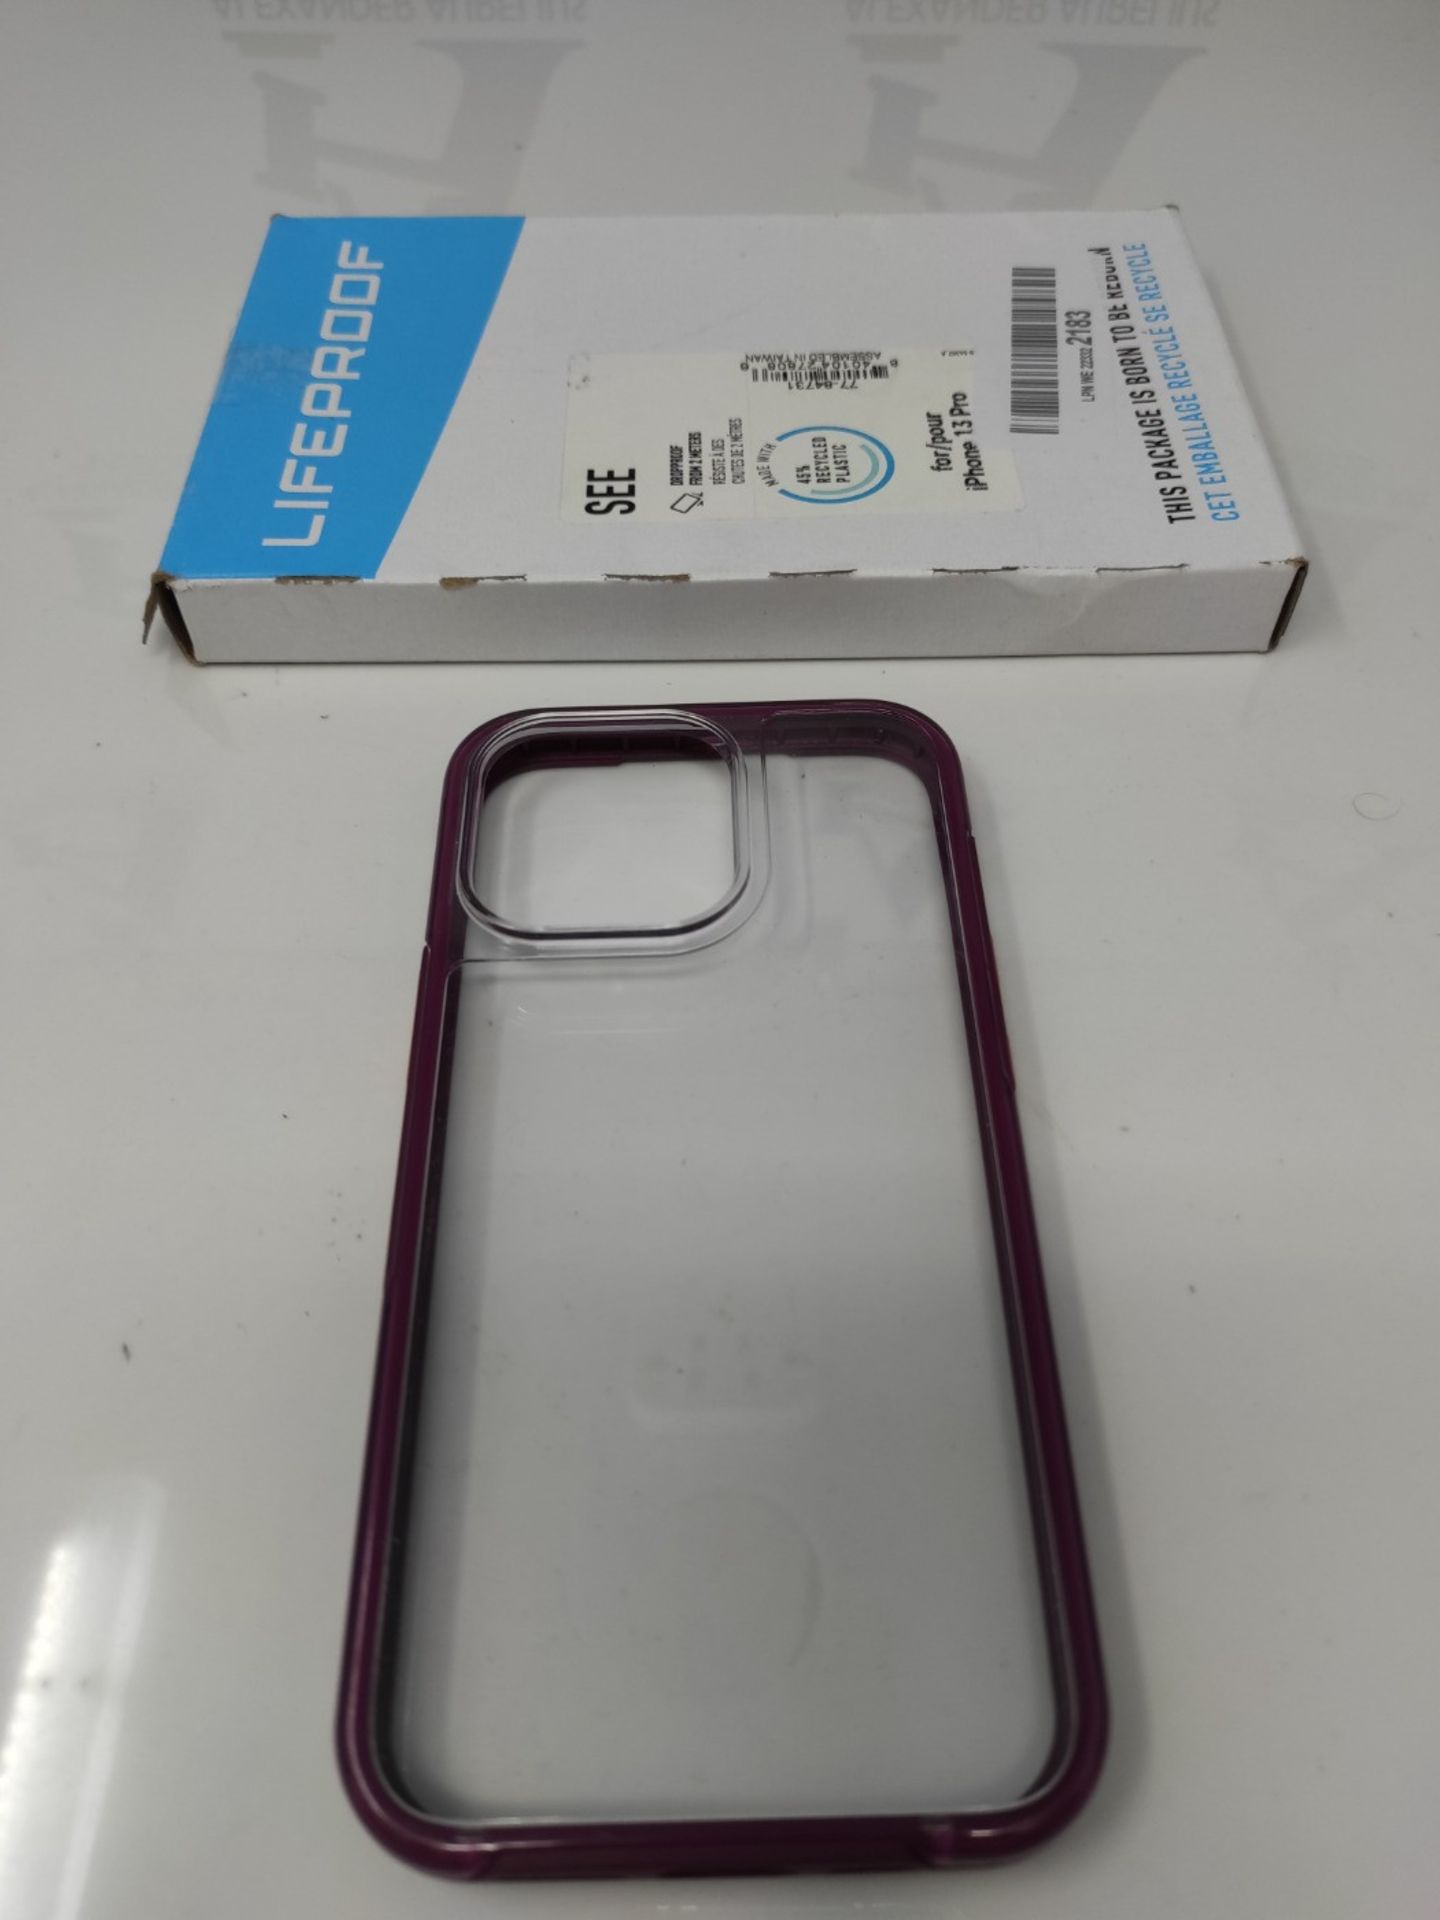 LifeProof SEE SERIES Case for iPhone 13 Pro (ONLY) - MOTIVATED PURPLE - Image 2 of 2